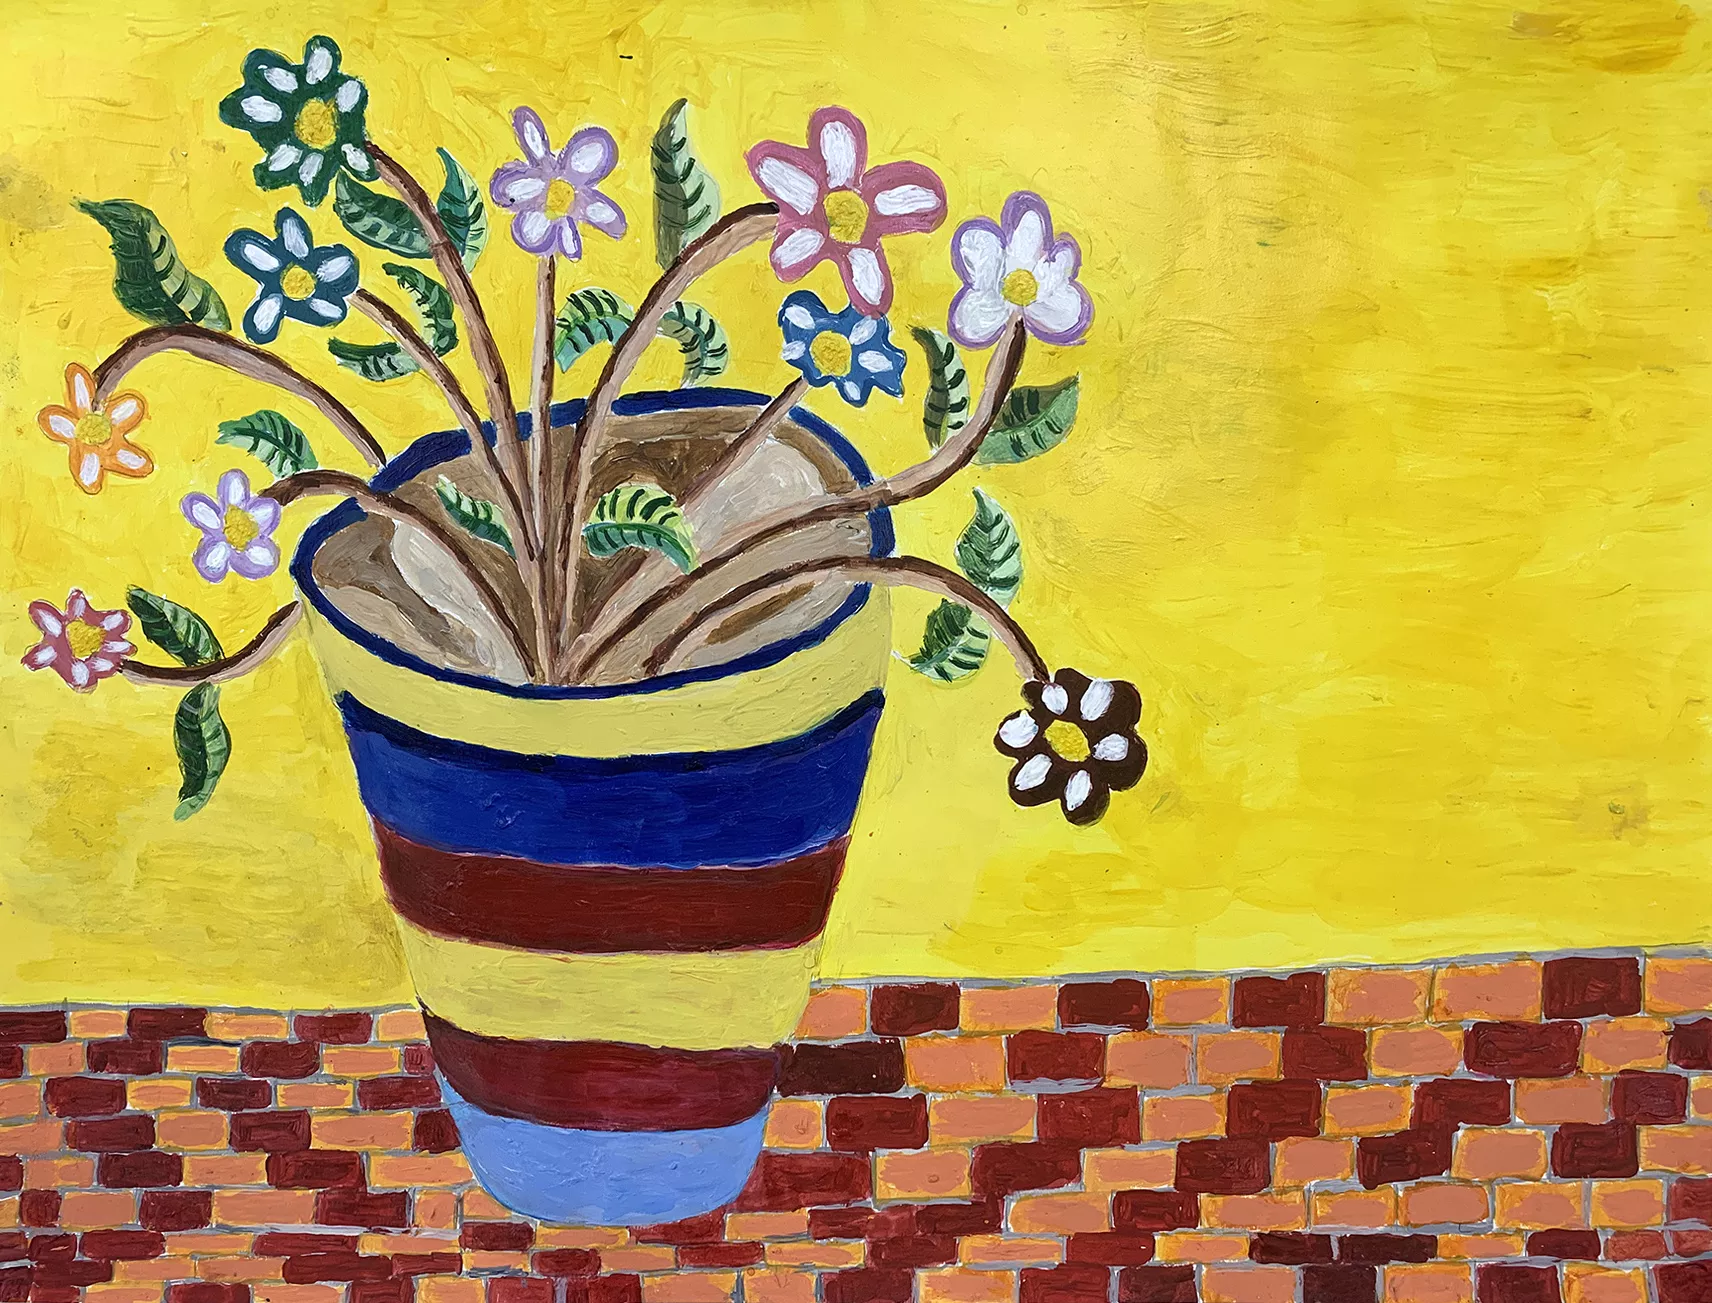 Vicente Siso Los Flores con le Pot, 2021 In this painting ten differently colored flowers on ten long stems have emerged from a boldly striped pot. The pot rests on an orange and red patterned surface. In the background, behind the flowers and the pot, is an expanse of golden yellow giving this scene a sunny feel.  Acrylic on paper, 18” x24”